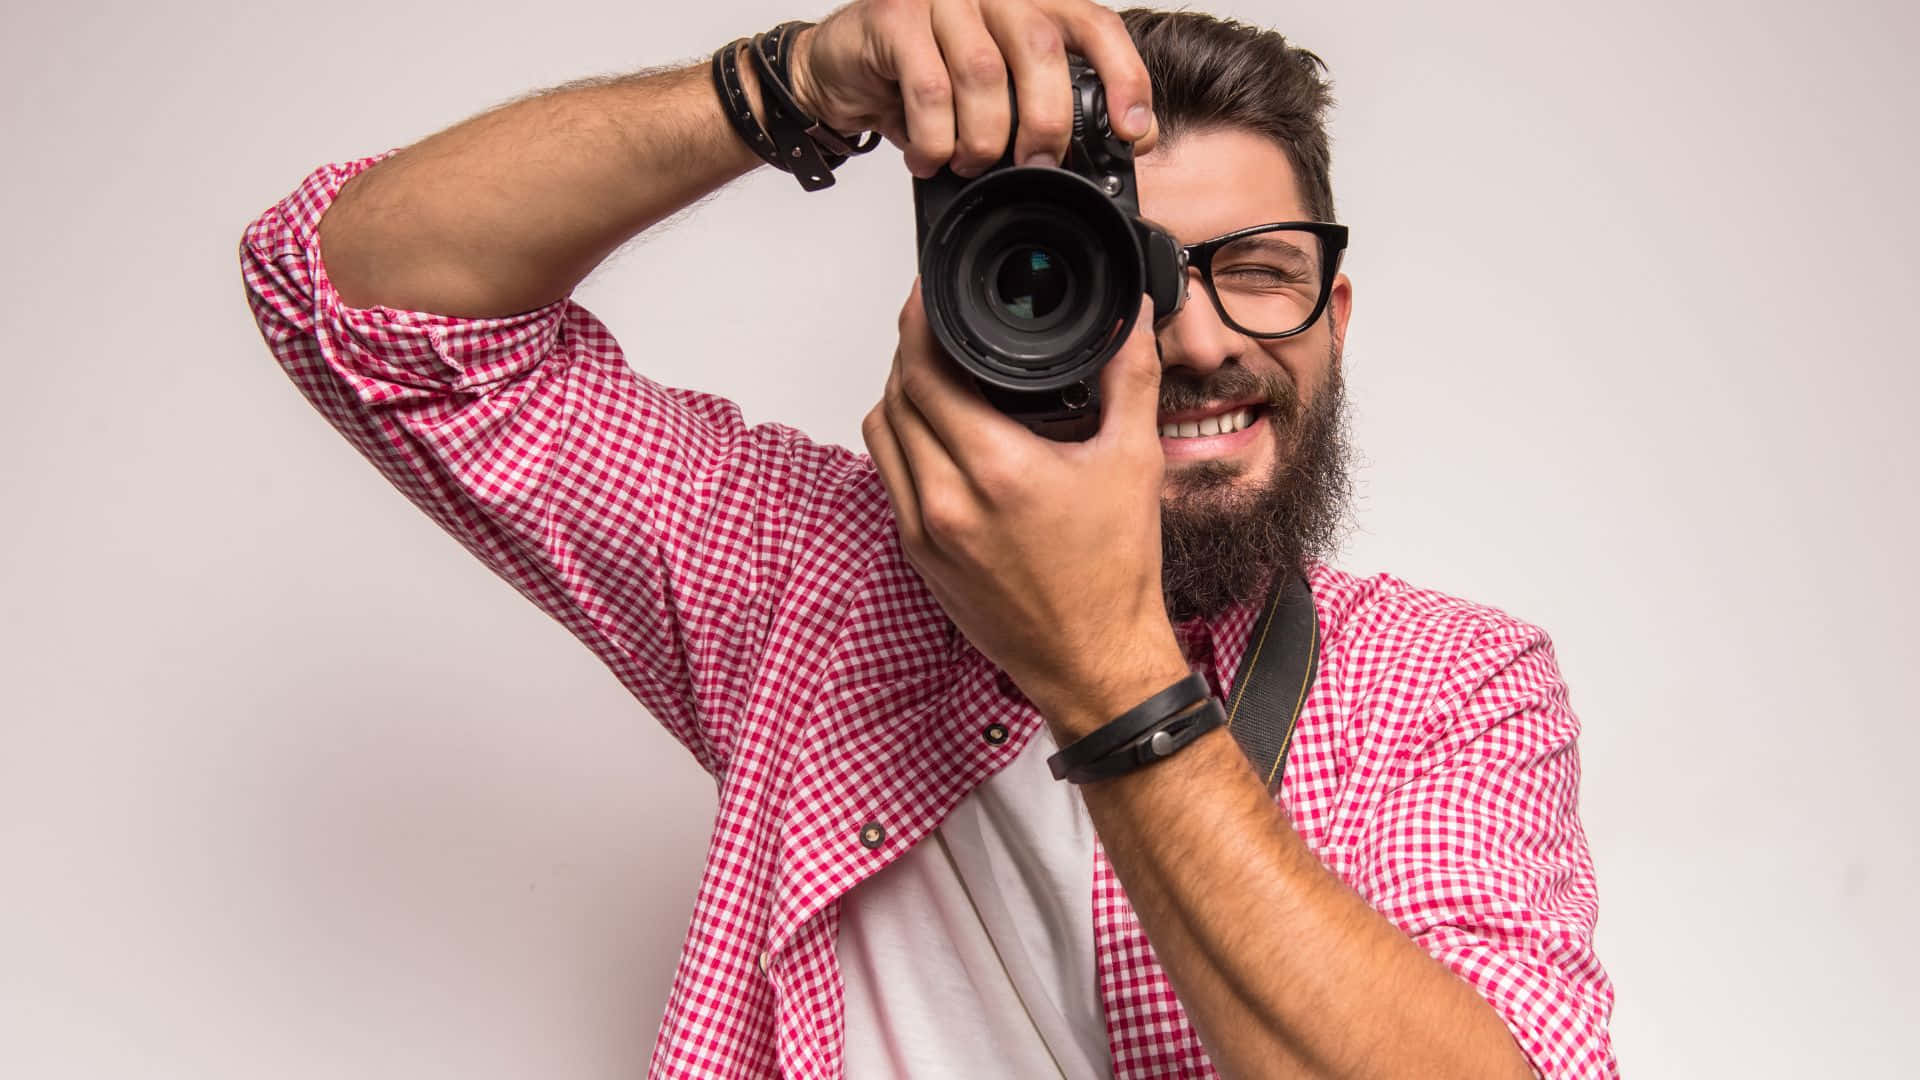 A Man With A Beard And Glasses Taking A Picture With His Camera